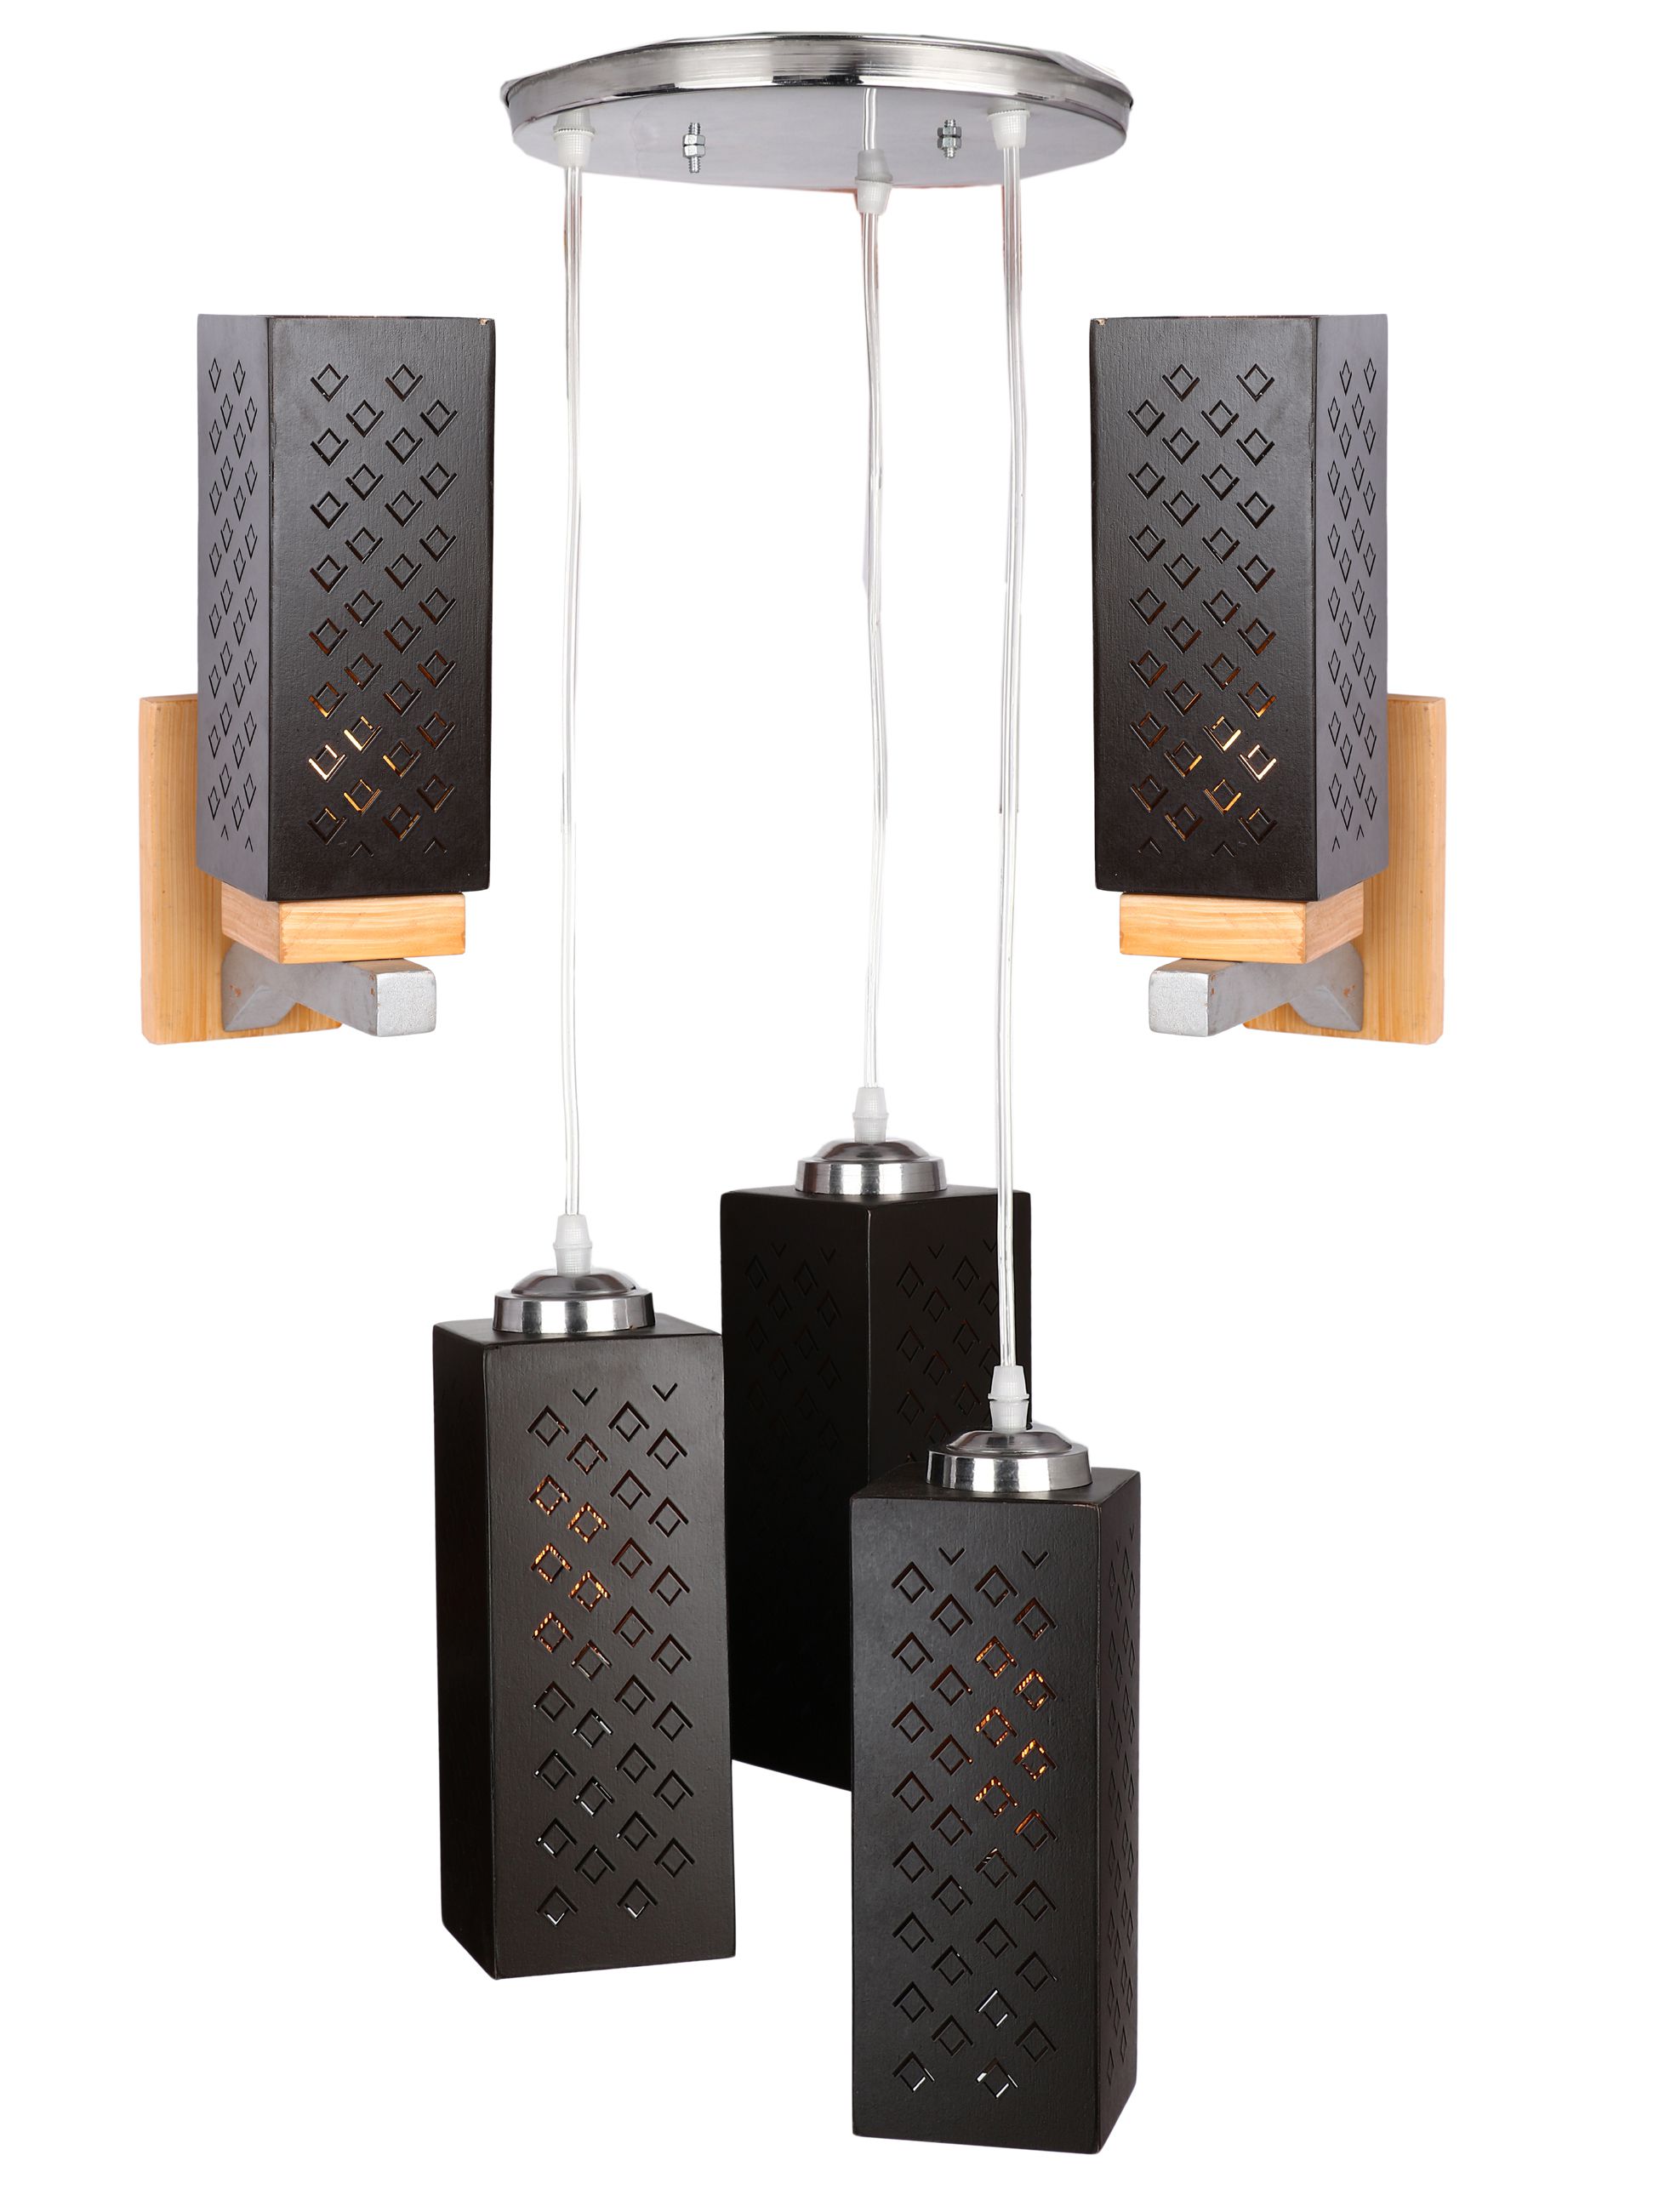     			Somil 7W Square Ceiling Light 69 cms. - Pack of 3